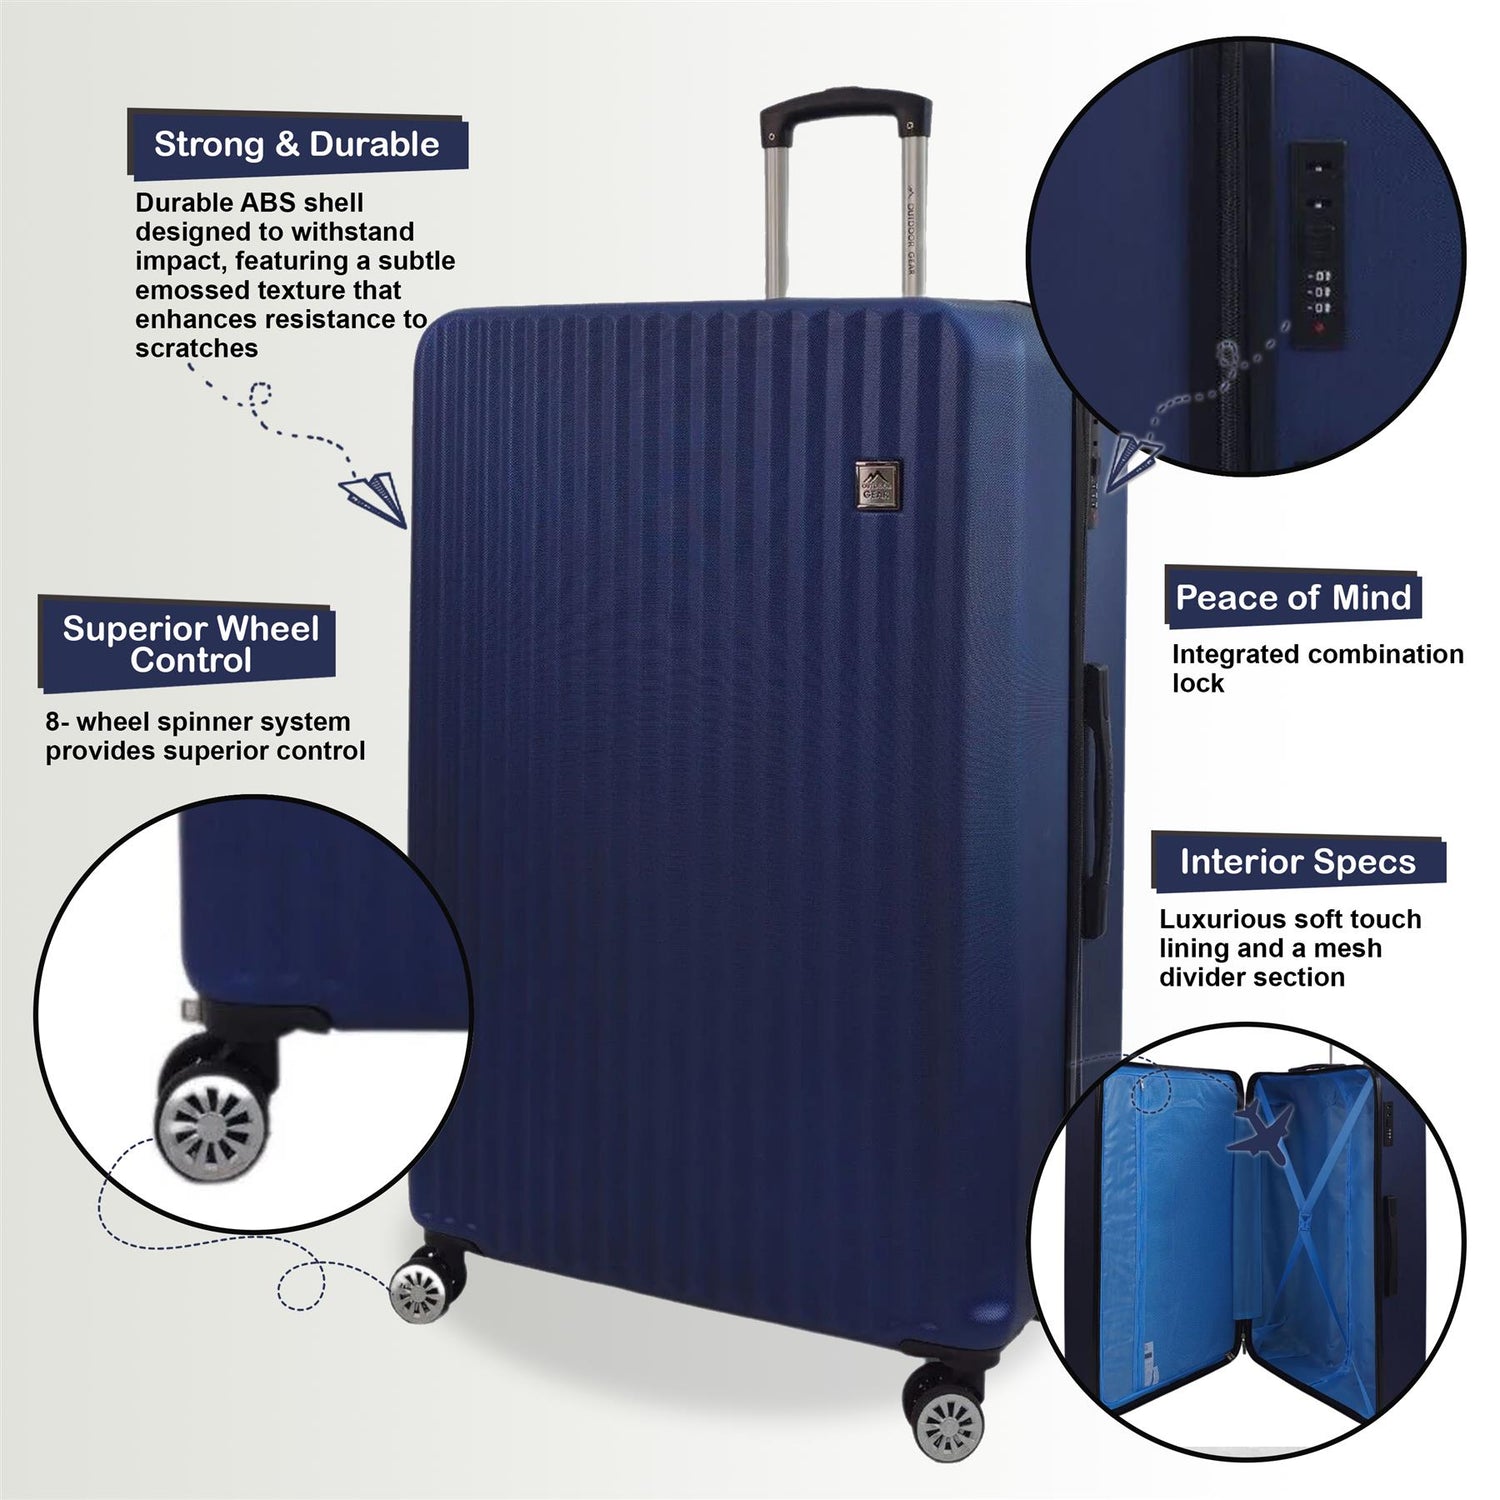 Albertville Extra Large Hard Shell Suitcase in Blue